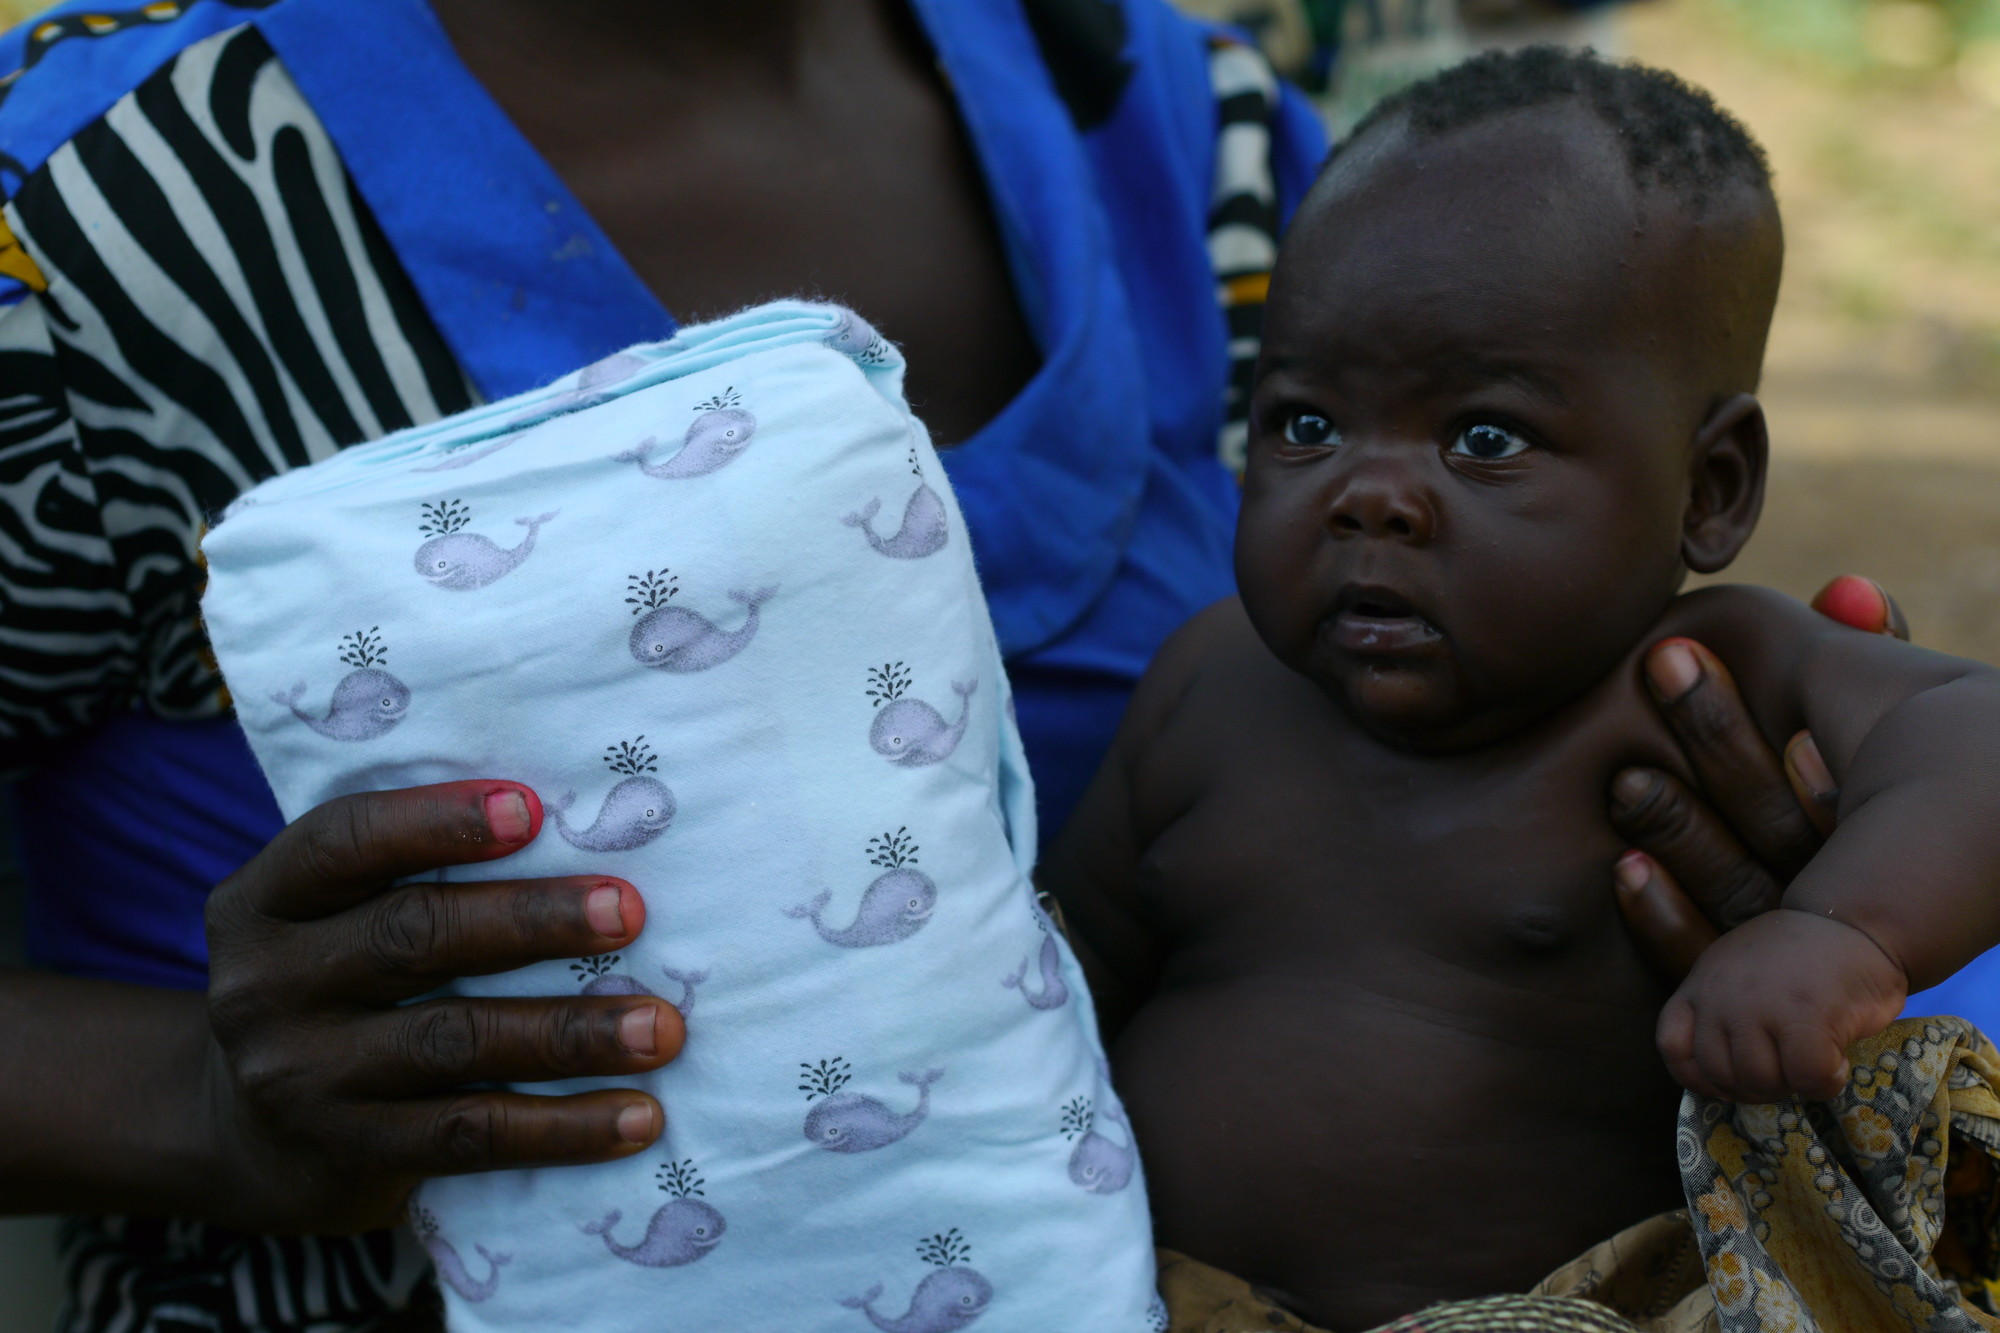 A person holds a baby on her lap while also holding a bundle of fabric